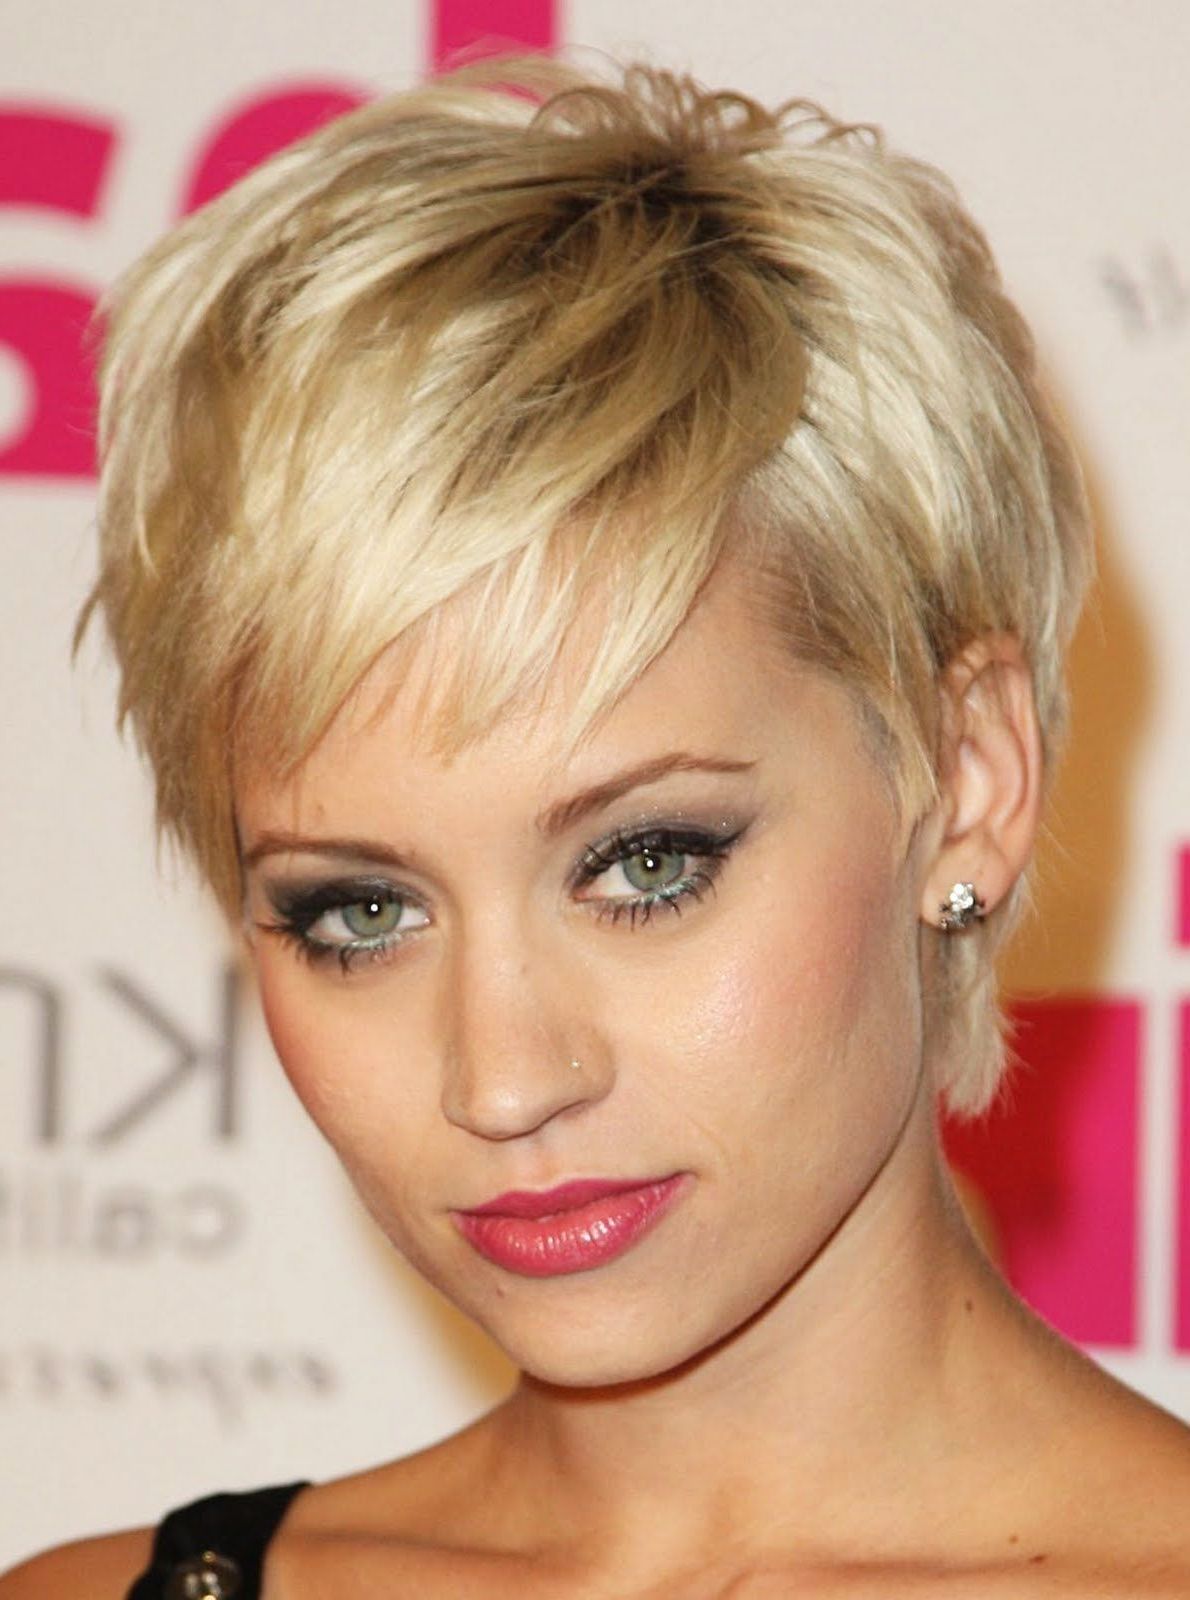 Short Hairstyles For Oval Faces | Hair Cut | Pinterest | Short Hair Intended For Short Hairstyles For Round Face And Fine Hair (View 8 of 25)